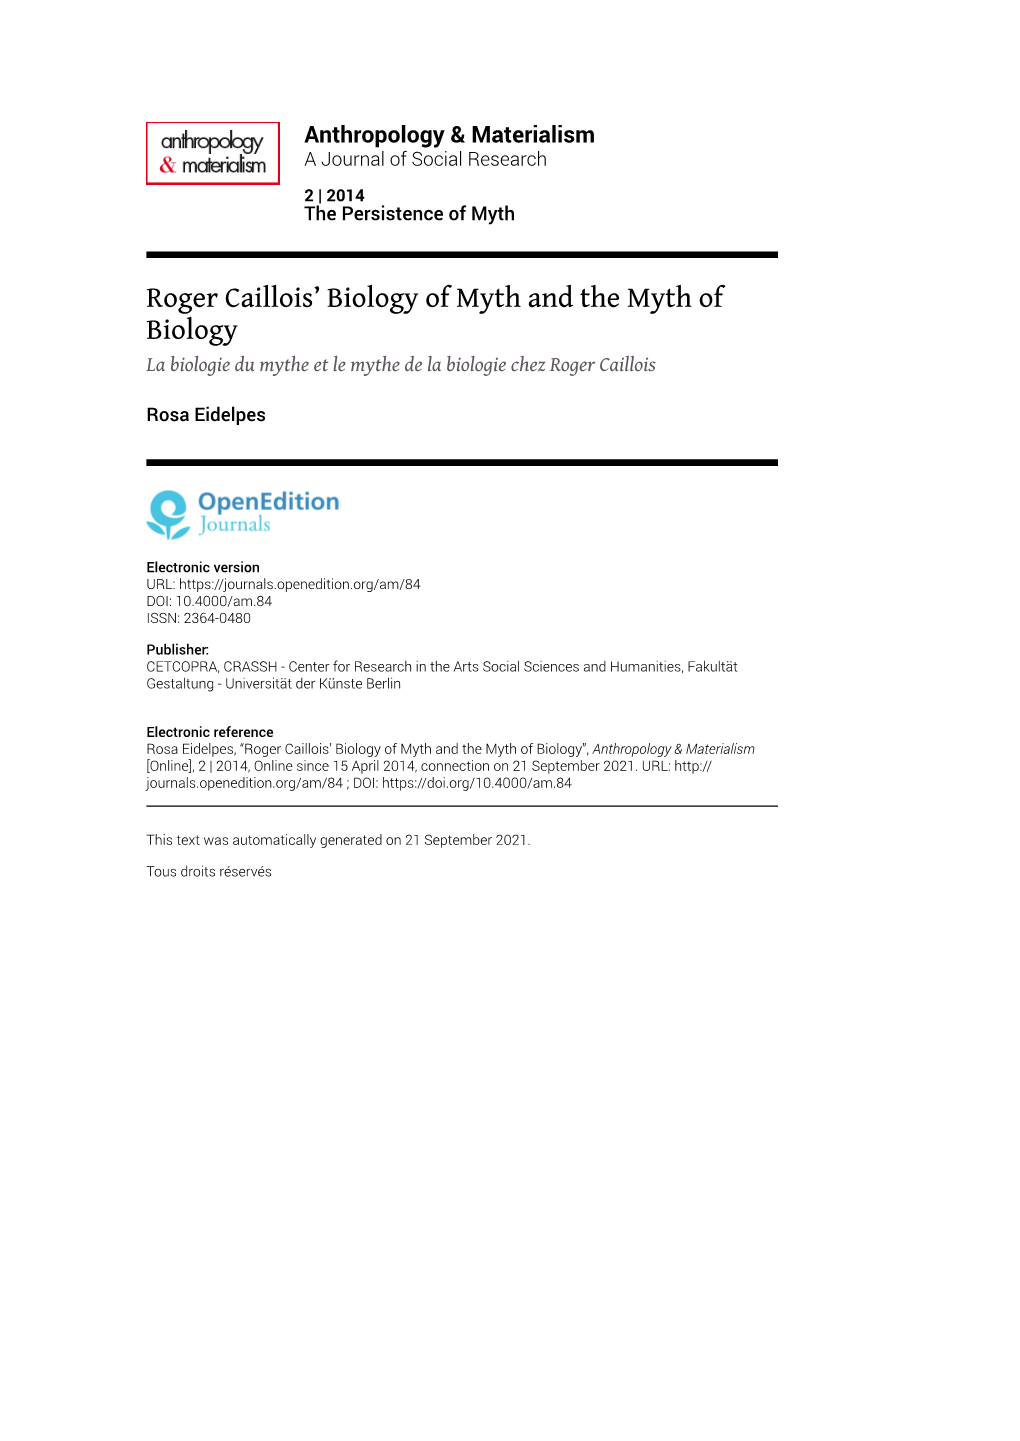 Anthropology & Materialism, 2 | 2014 Roger Caillois’ Biology of Myth and the Myth of Biology 2